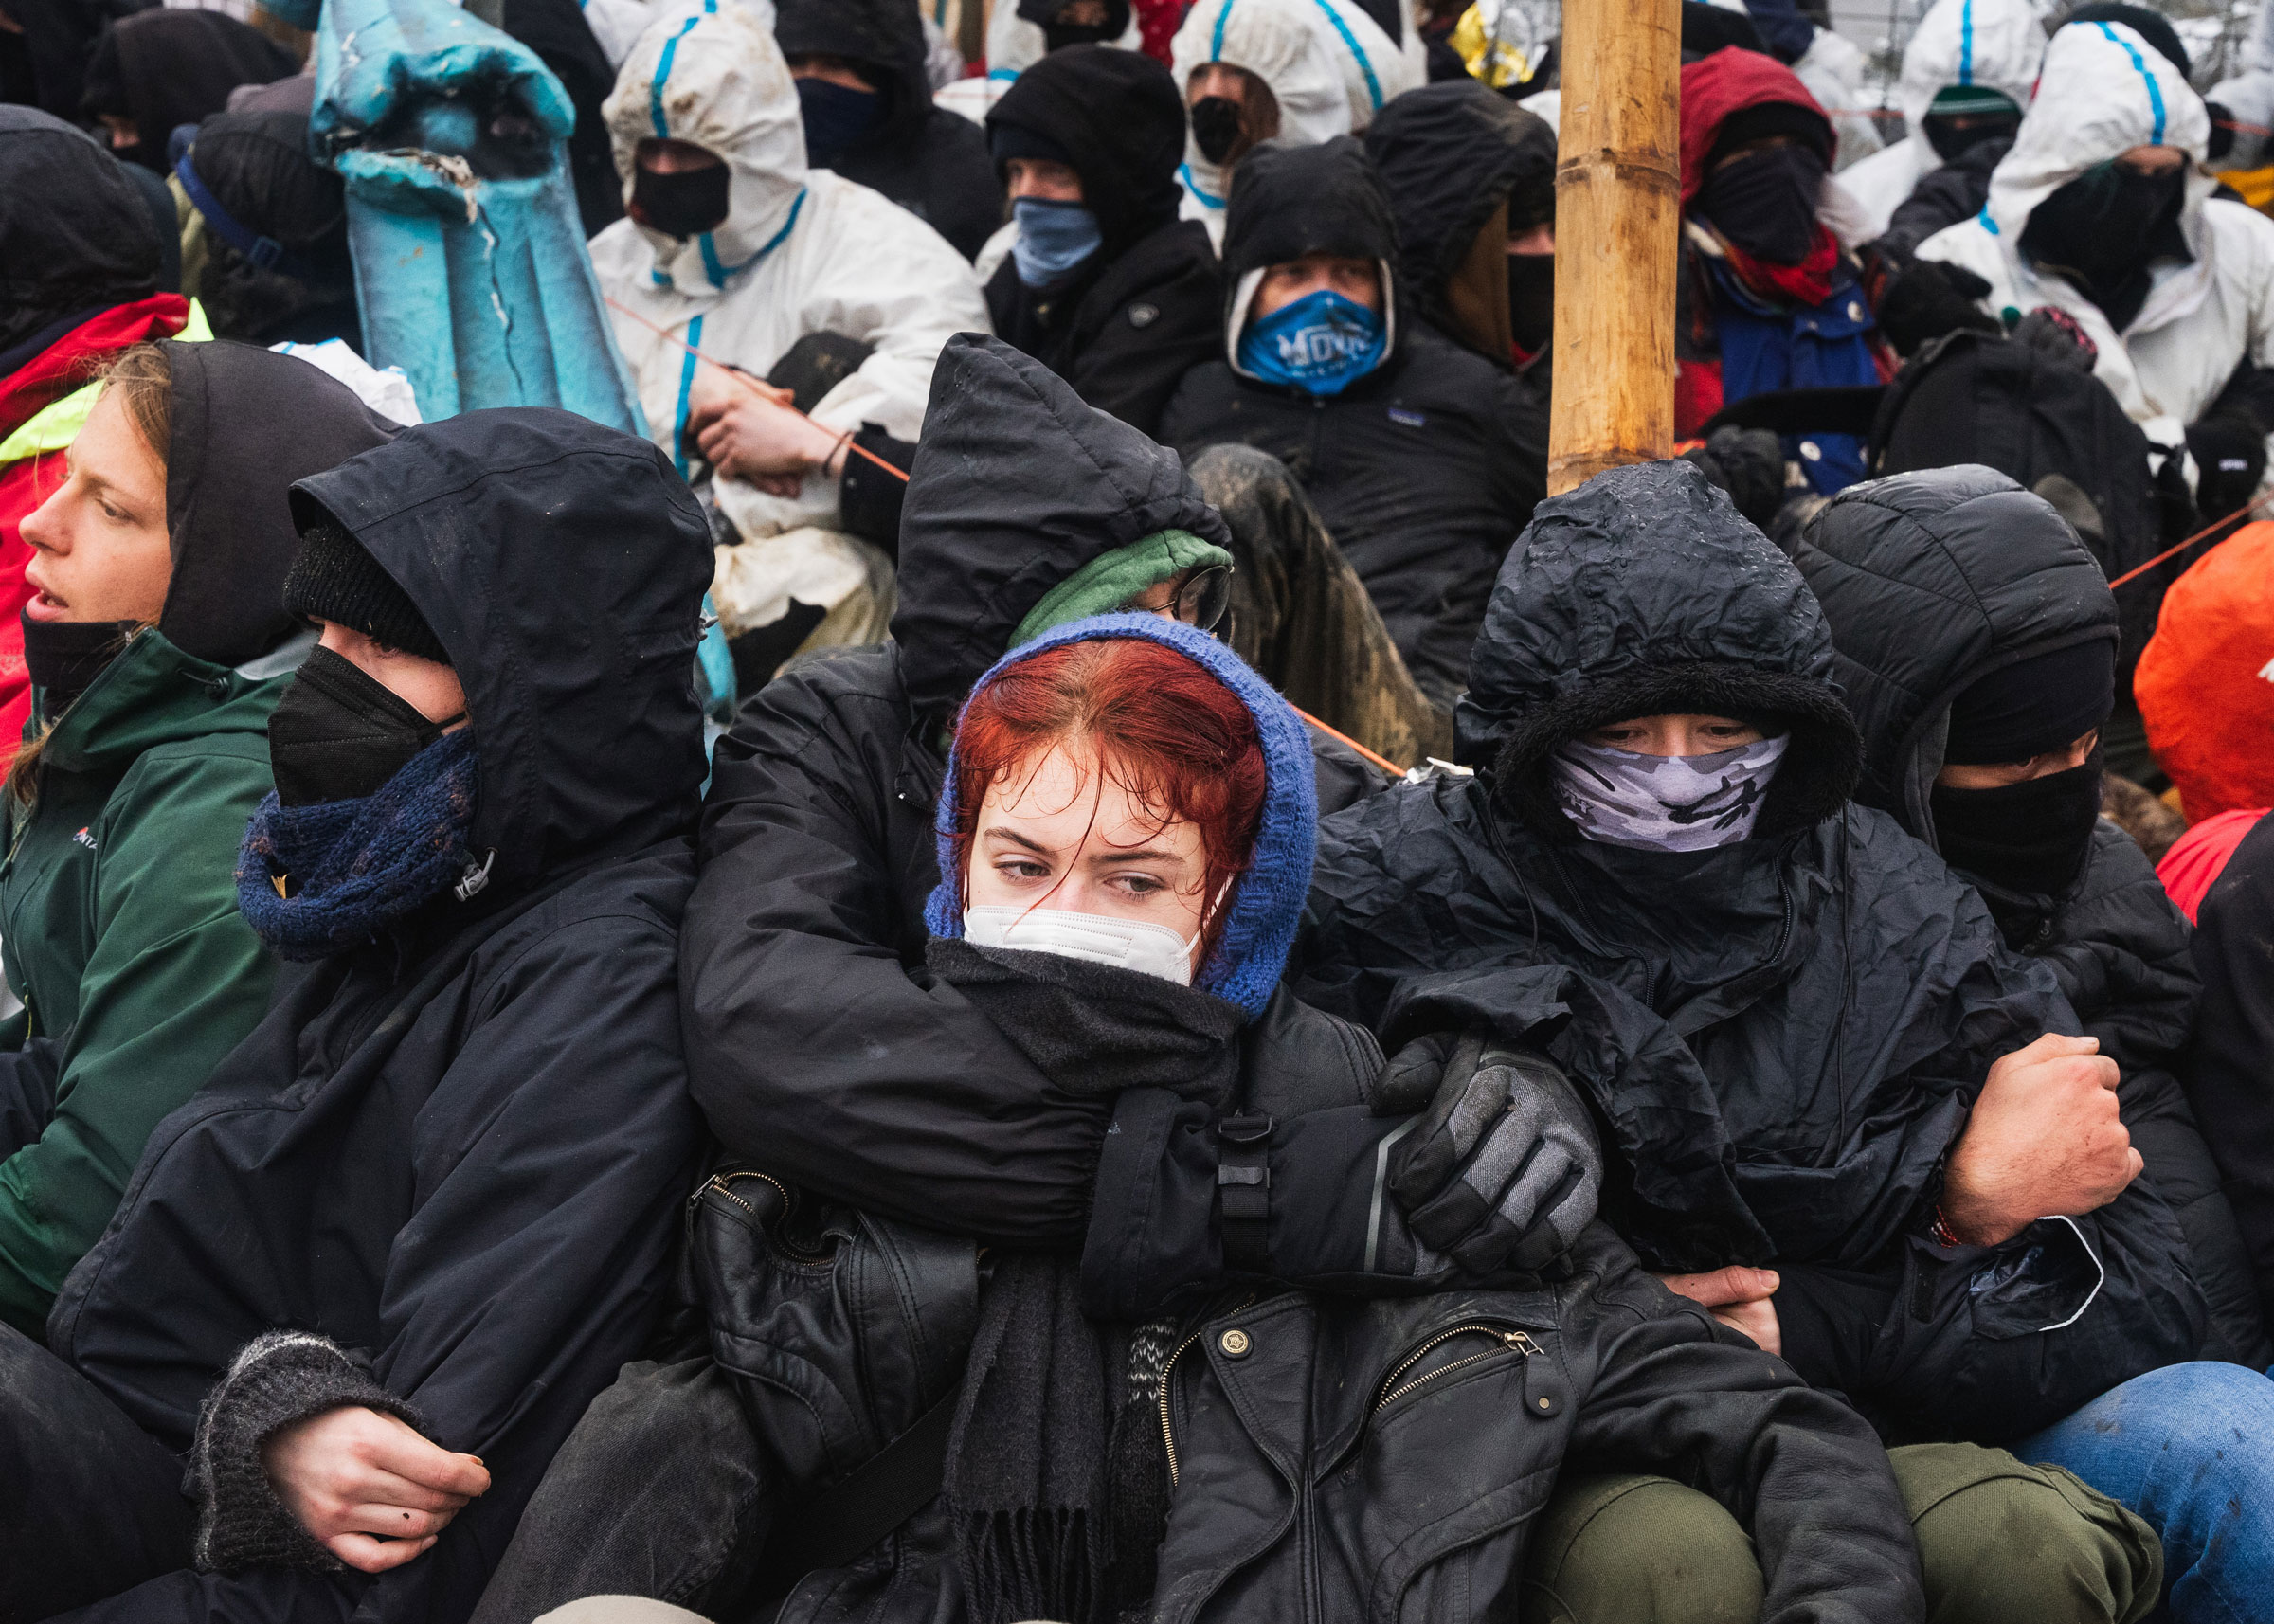 Climate activists face police forces at the Garzweiler mine in Lutzerath, Germany, on Jan. 11, 2023. (Aurelien Goubau—Hans Lucas/Red​ux)